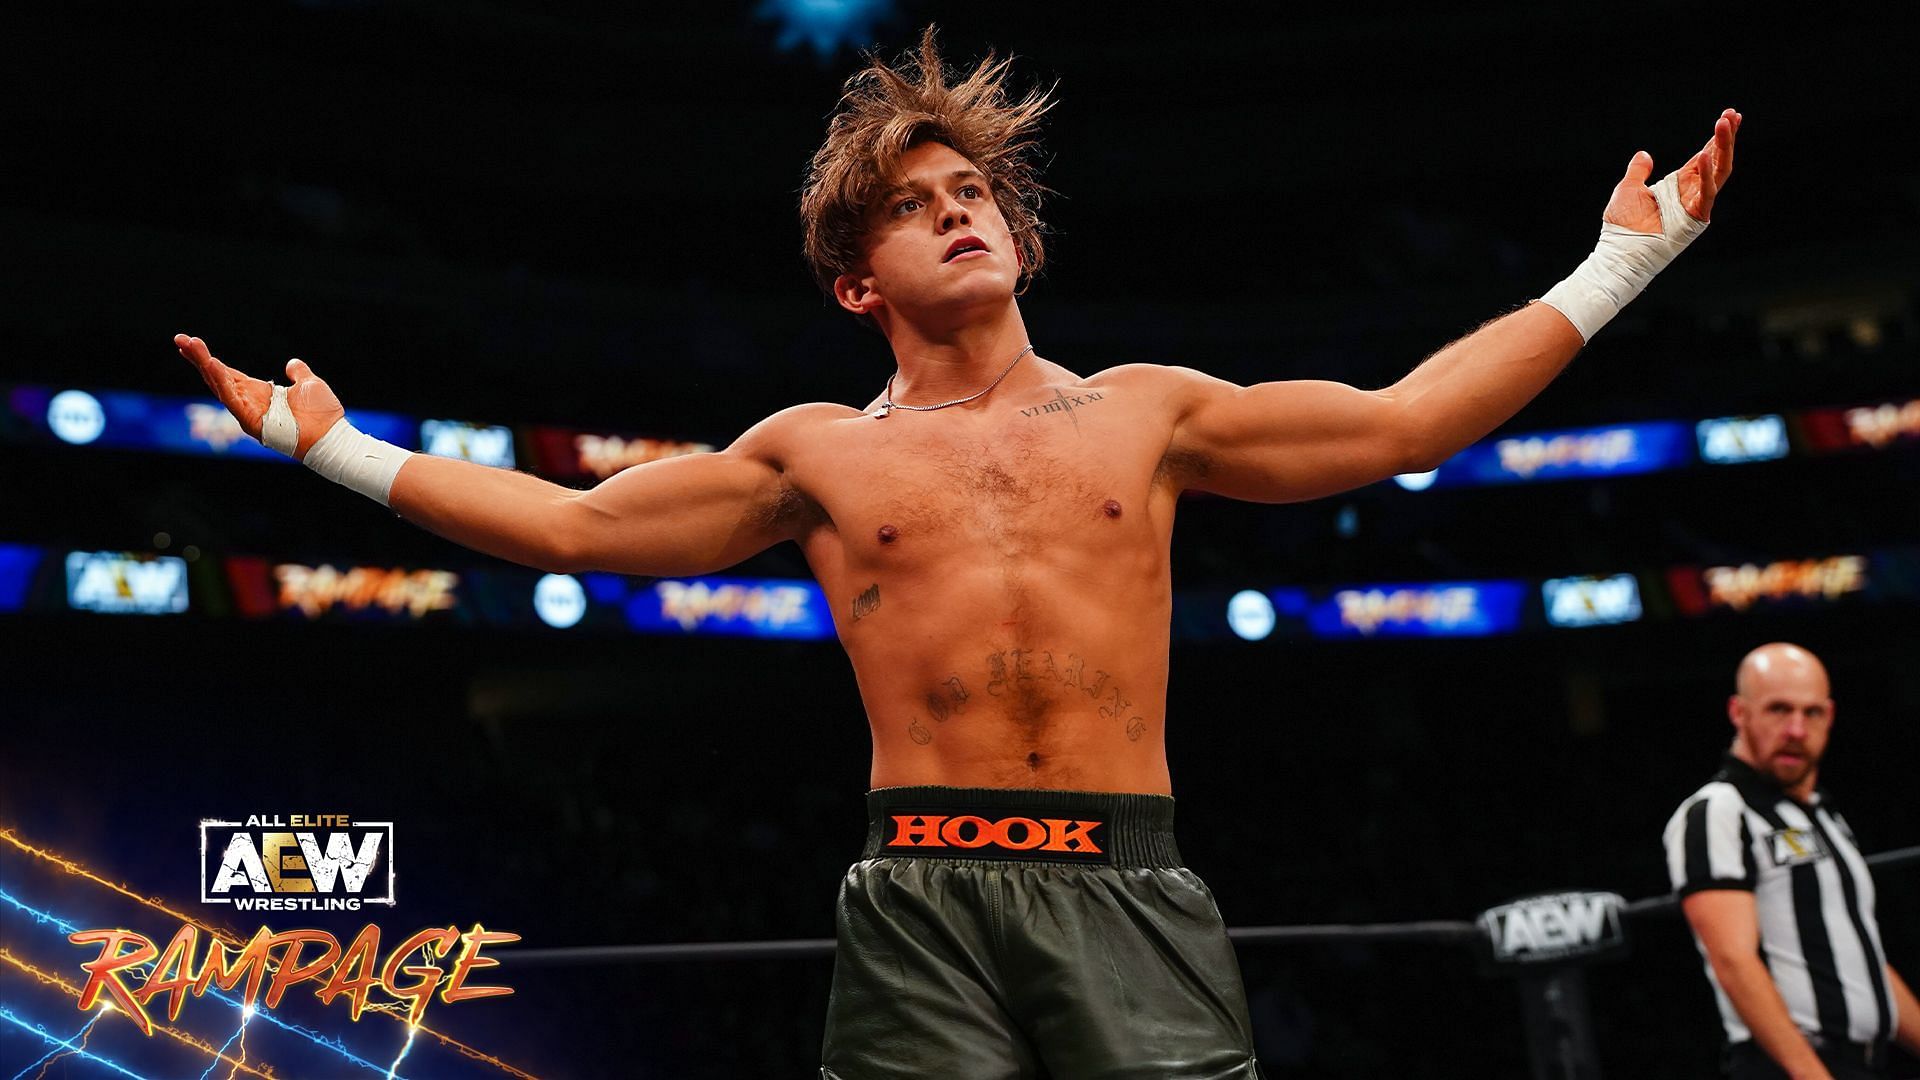 Hook made his AEW debut on Rampage in December 2021.